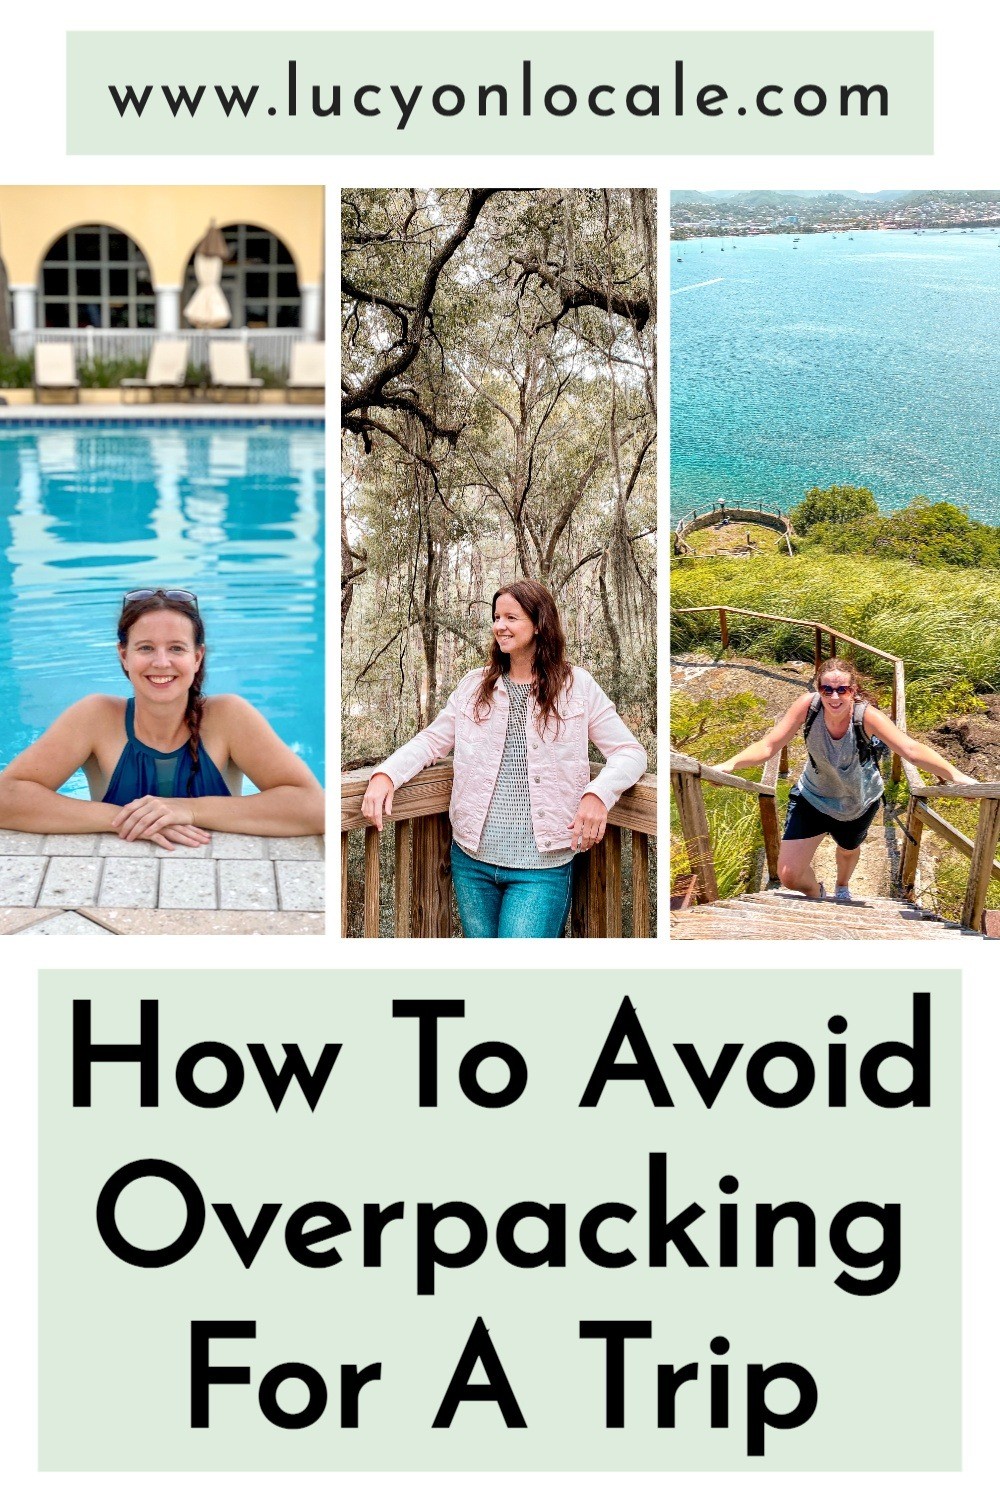 How To Avoid Overpacking for a Trip